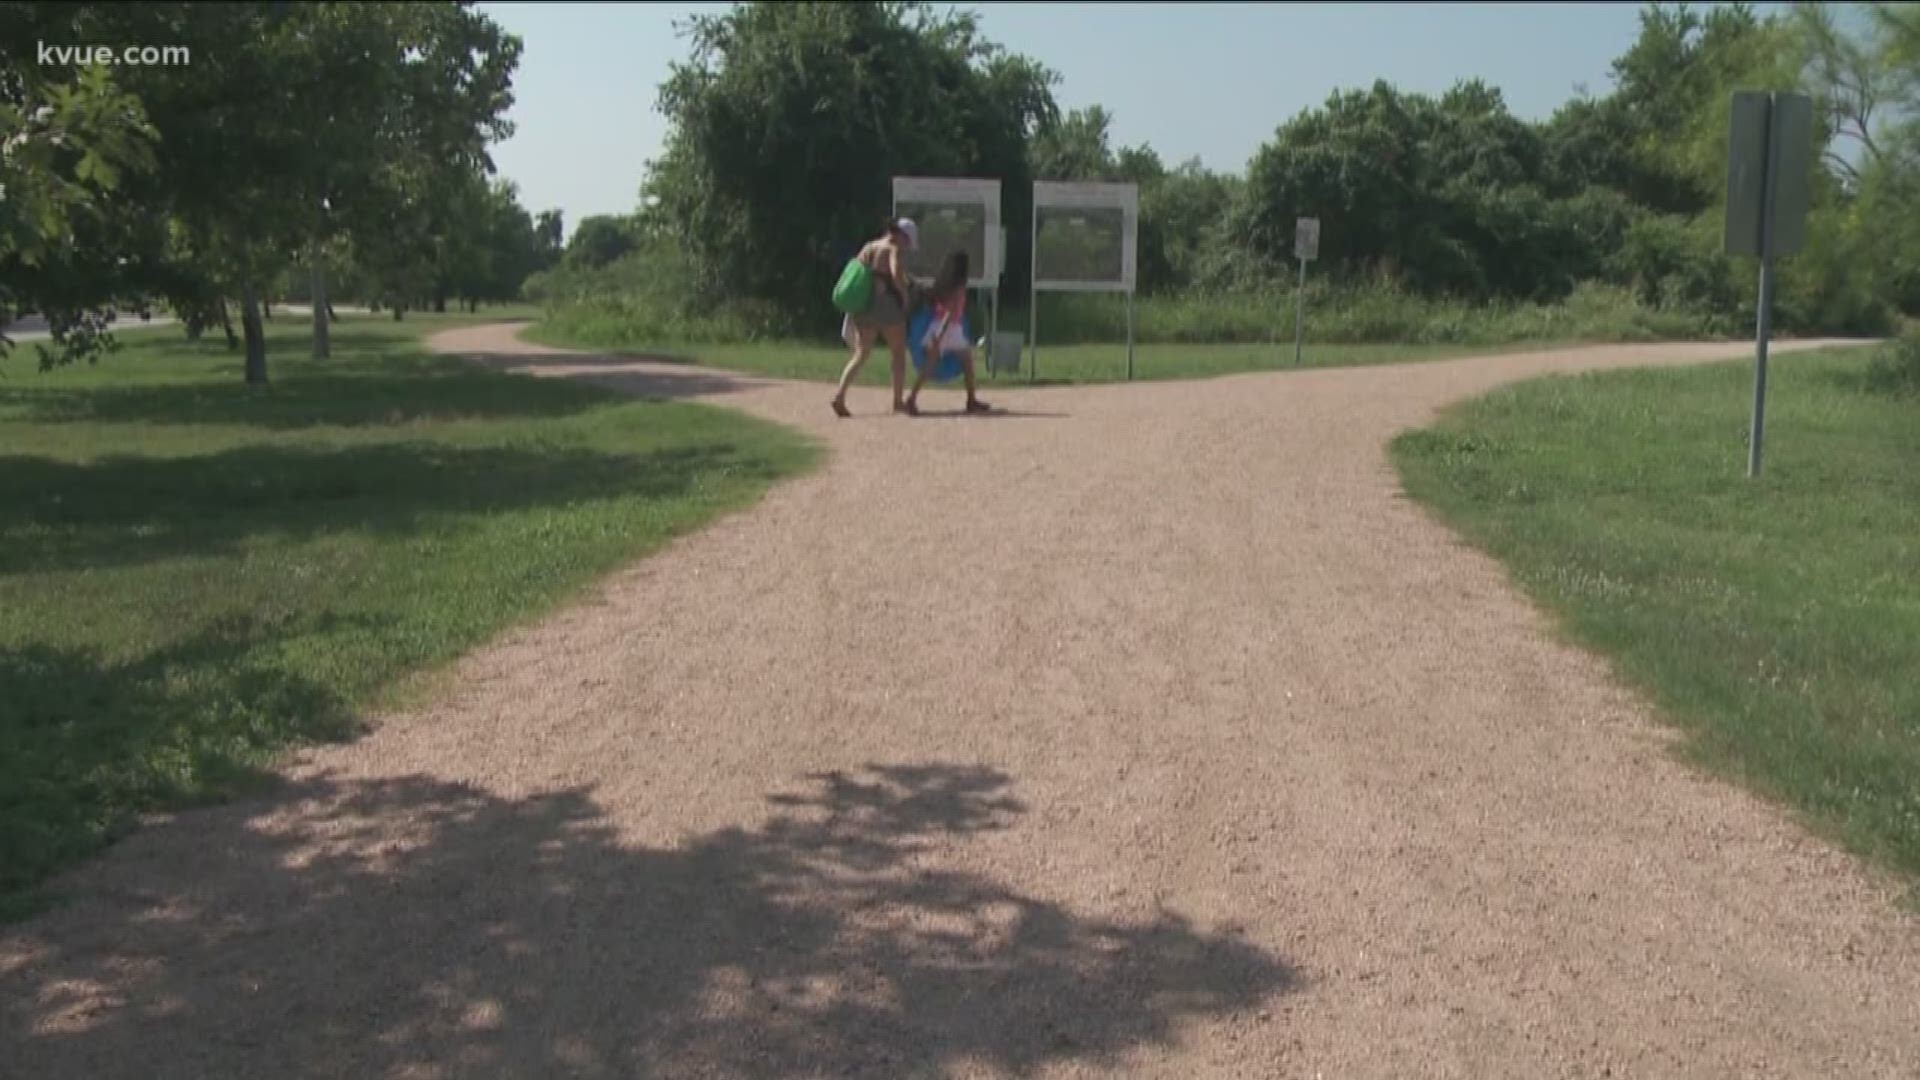 Austin police still haven't found the man who they say attacked a jogger in southeast Austin on the Fourth of July.